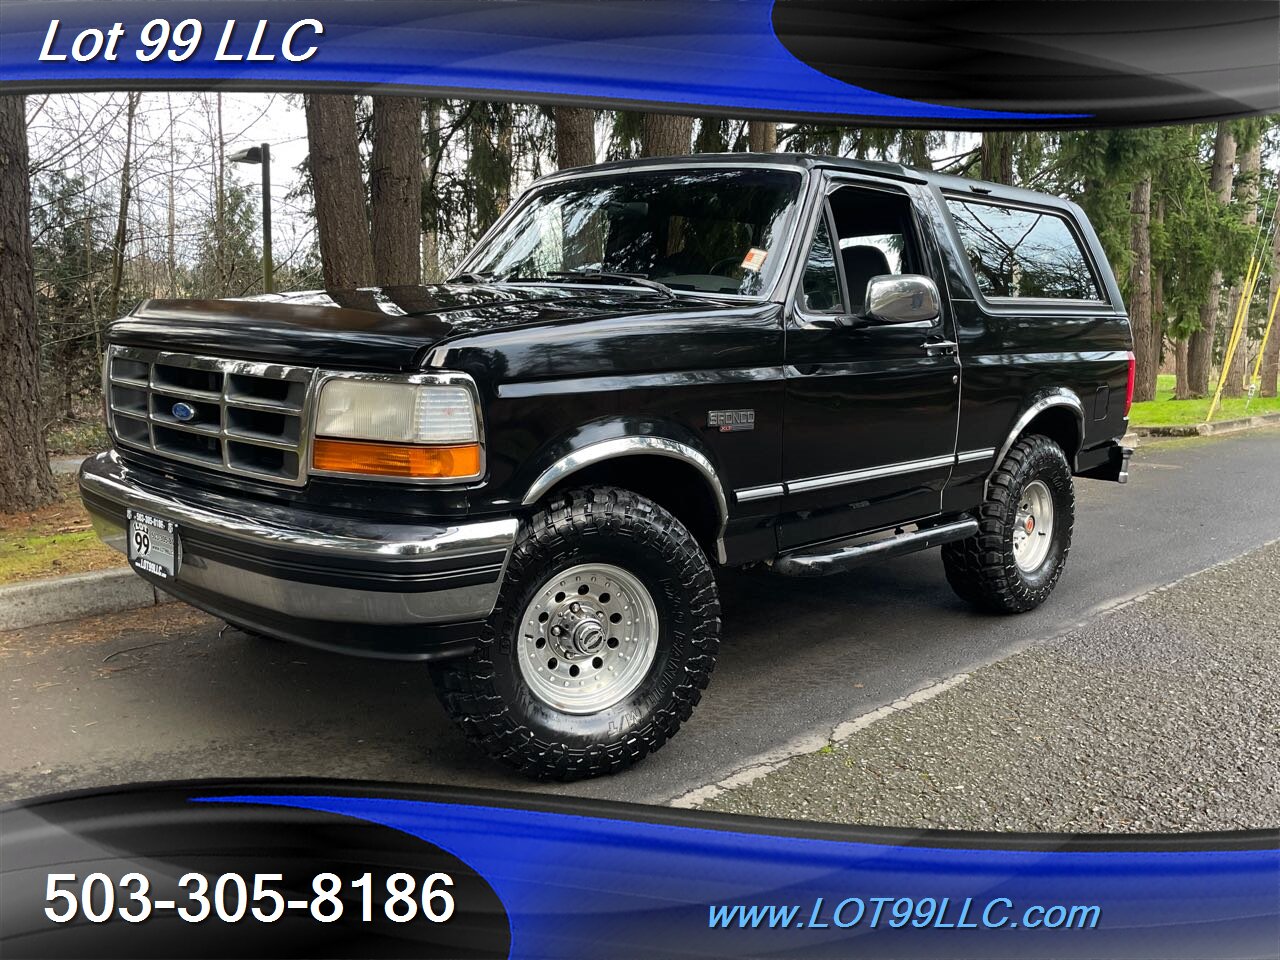 1993 Ford Bronco XLT 4x4 5.8L V8 New 33 " Tires and Carpet KIT   - Photo 2 - Milwaukie, OR 97267